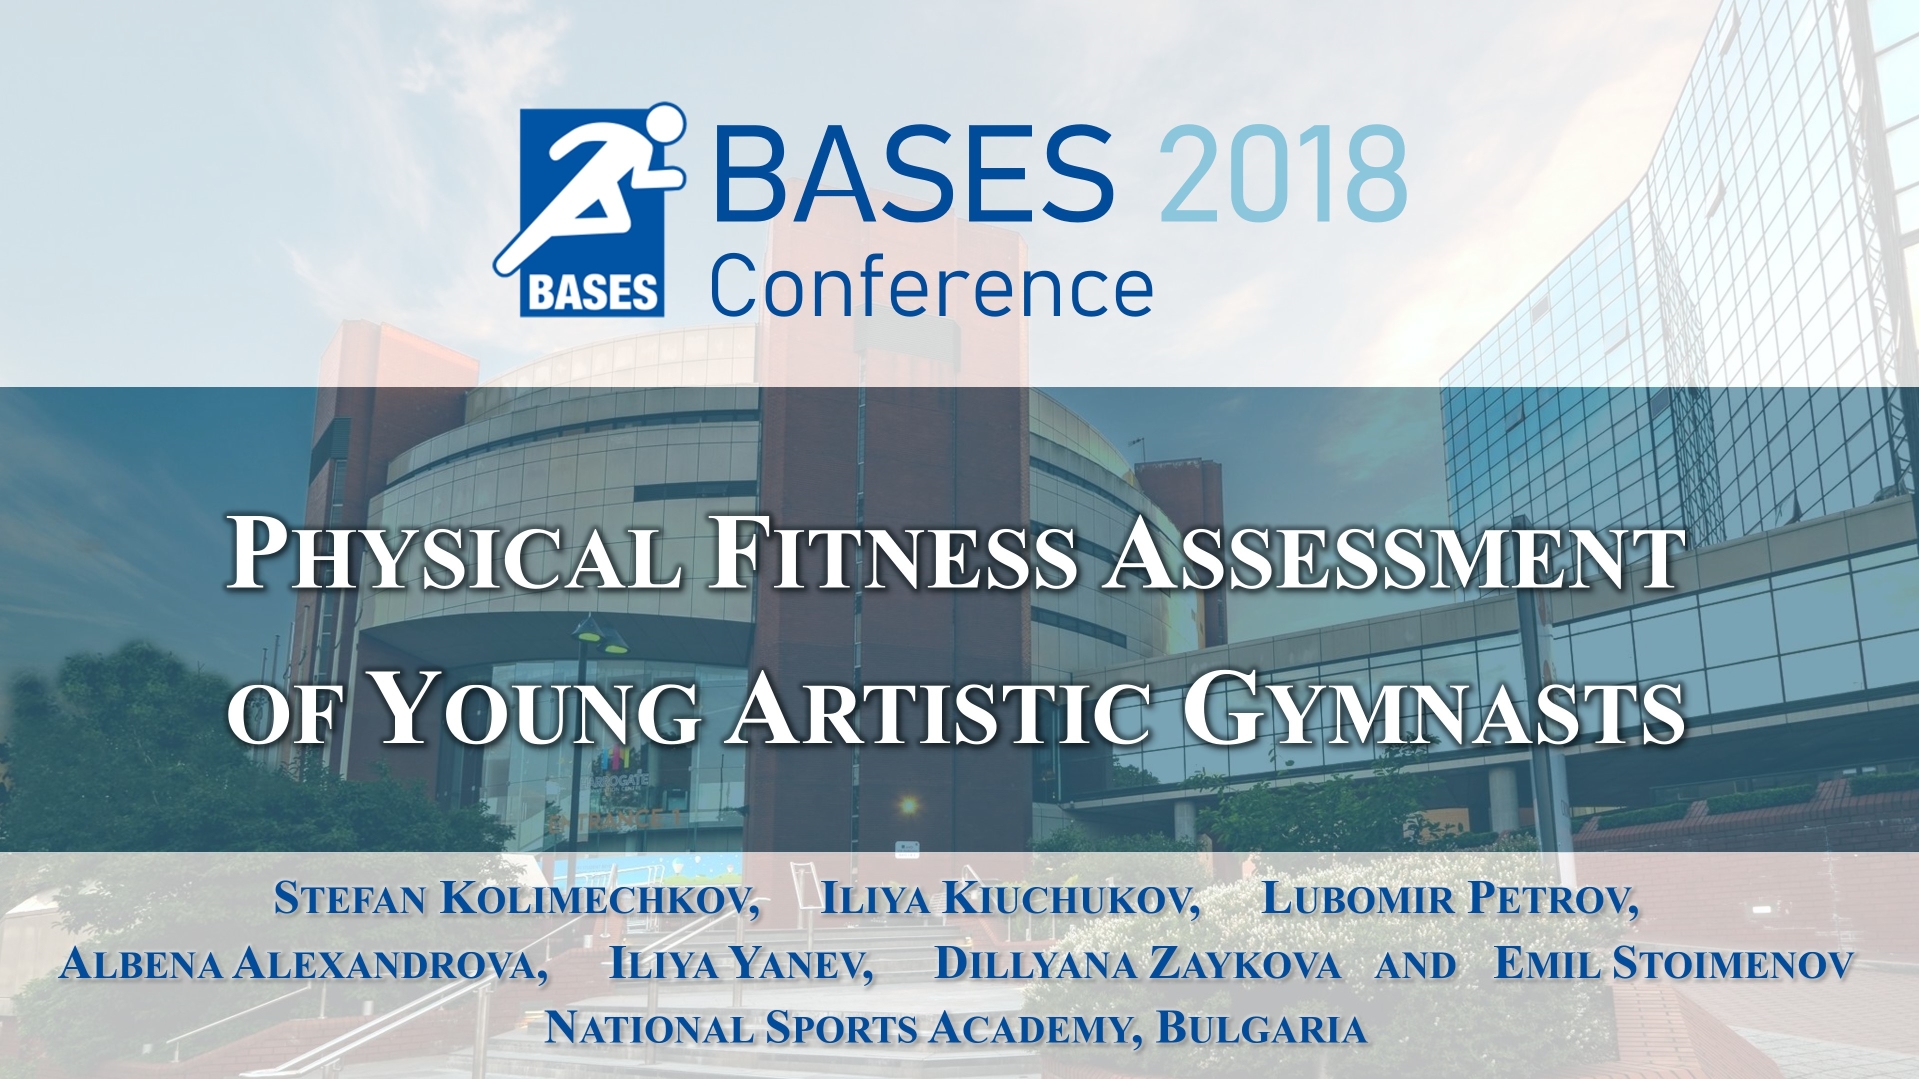 Physical fitness assessment of young artistic gymnasts at the BASES Conference 2018